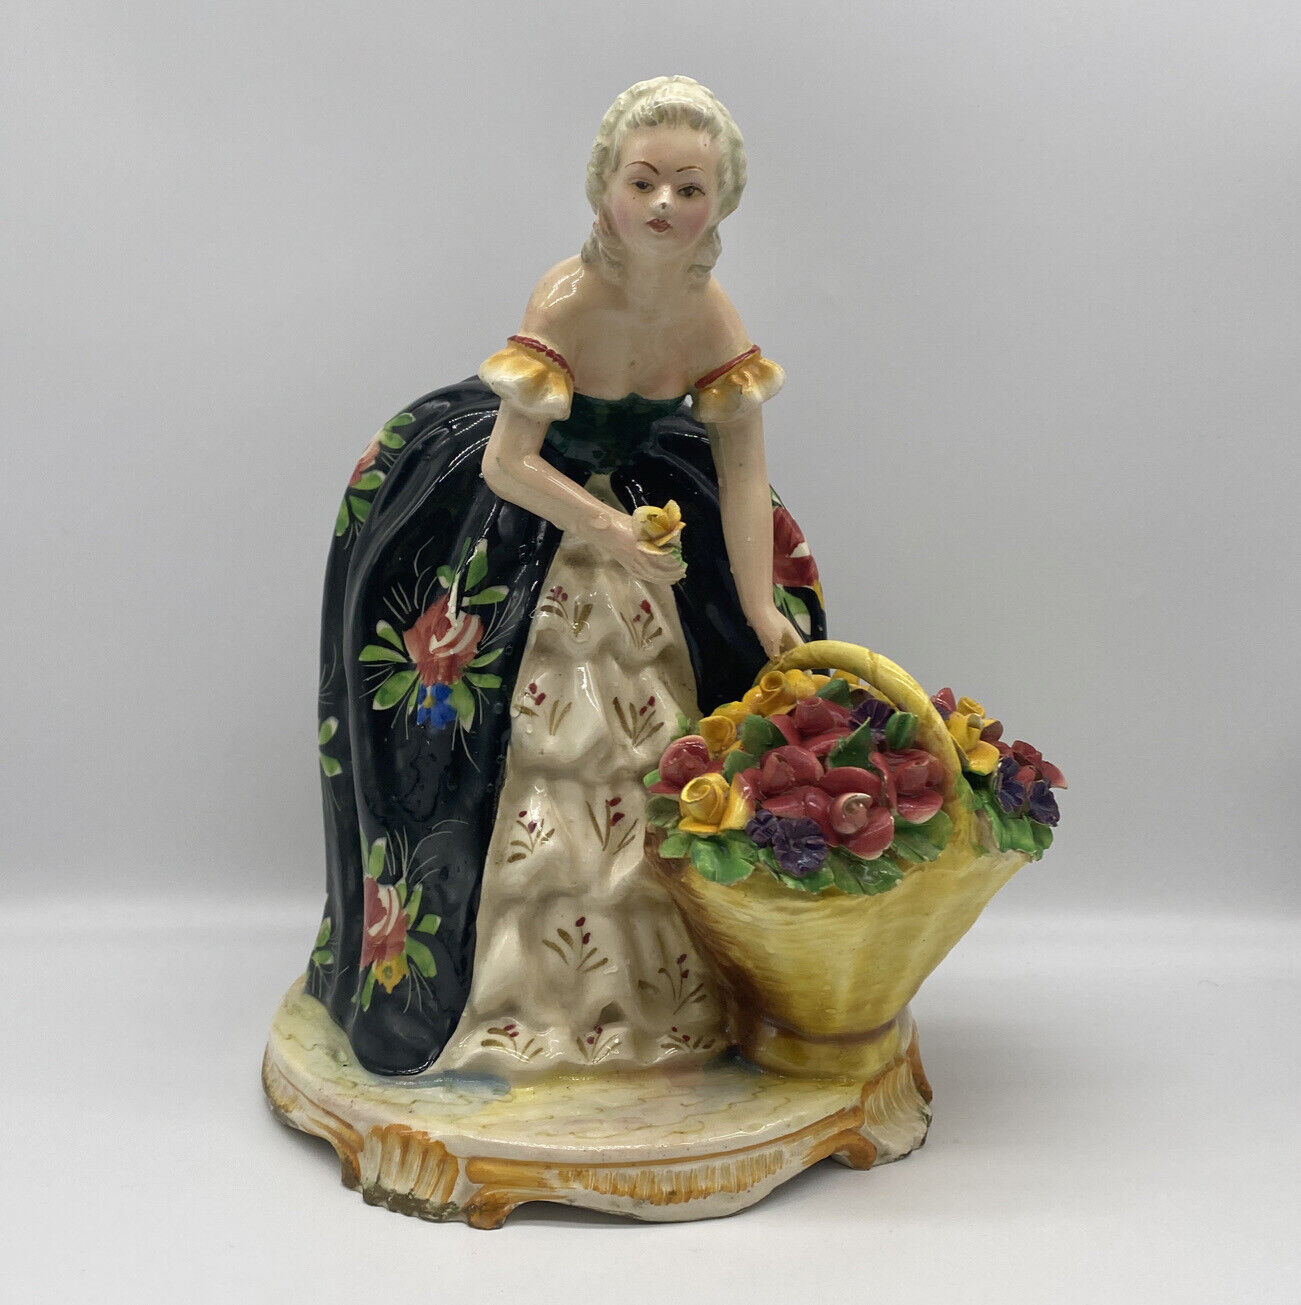 Vintage Woman With Flower Basket Large Porcelain Figurine Made In Italy 1967